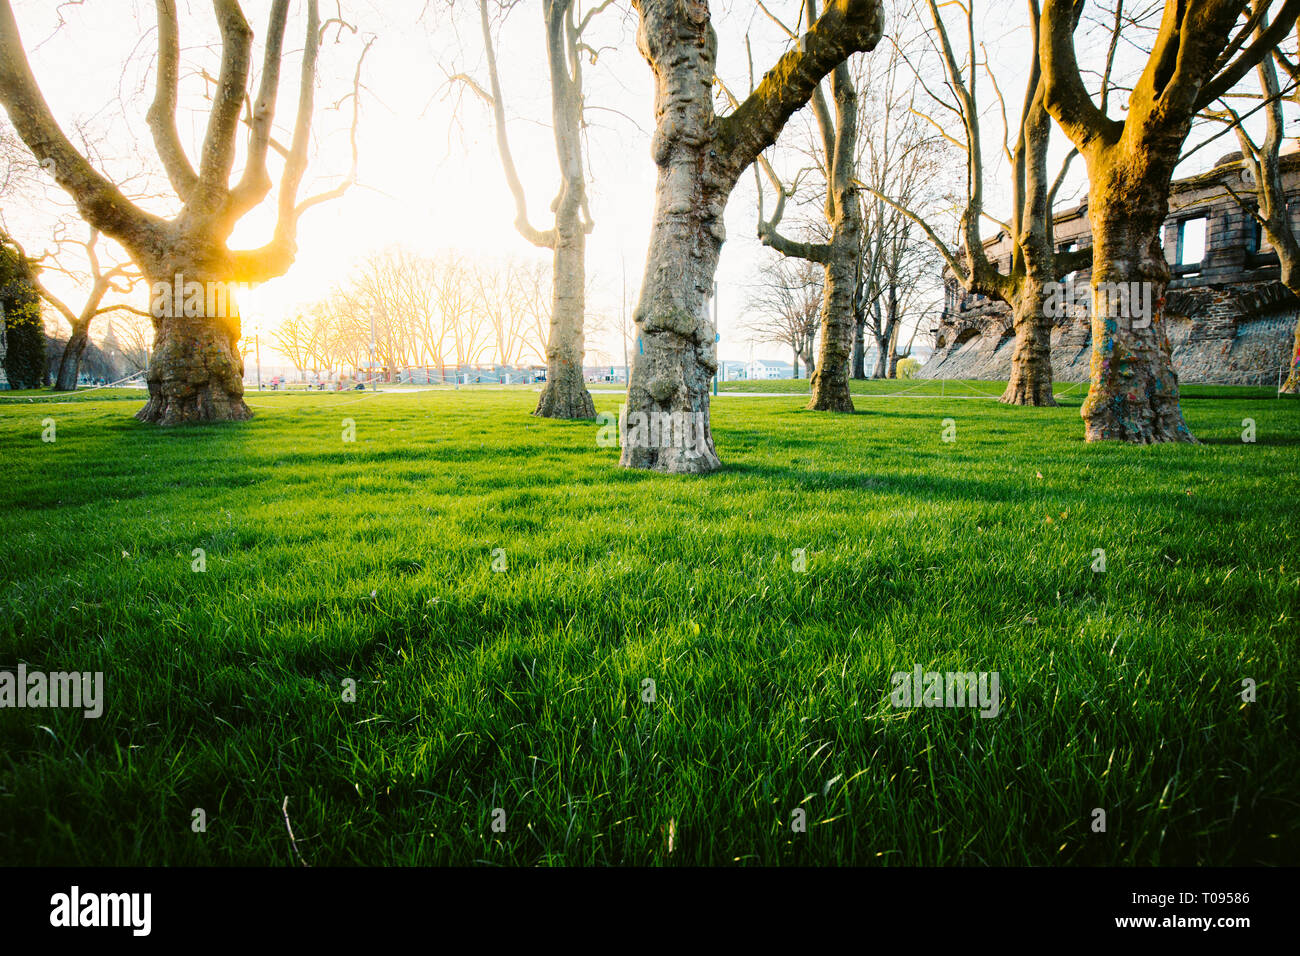 Panoramic low wide angle view of a row of old trees with fresh green grass in a scenic public park illuminated in beautiful golden evening light at su Stock Photo